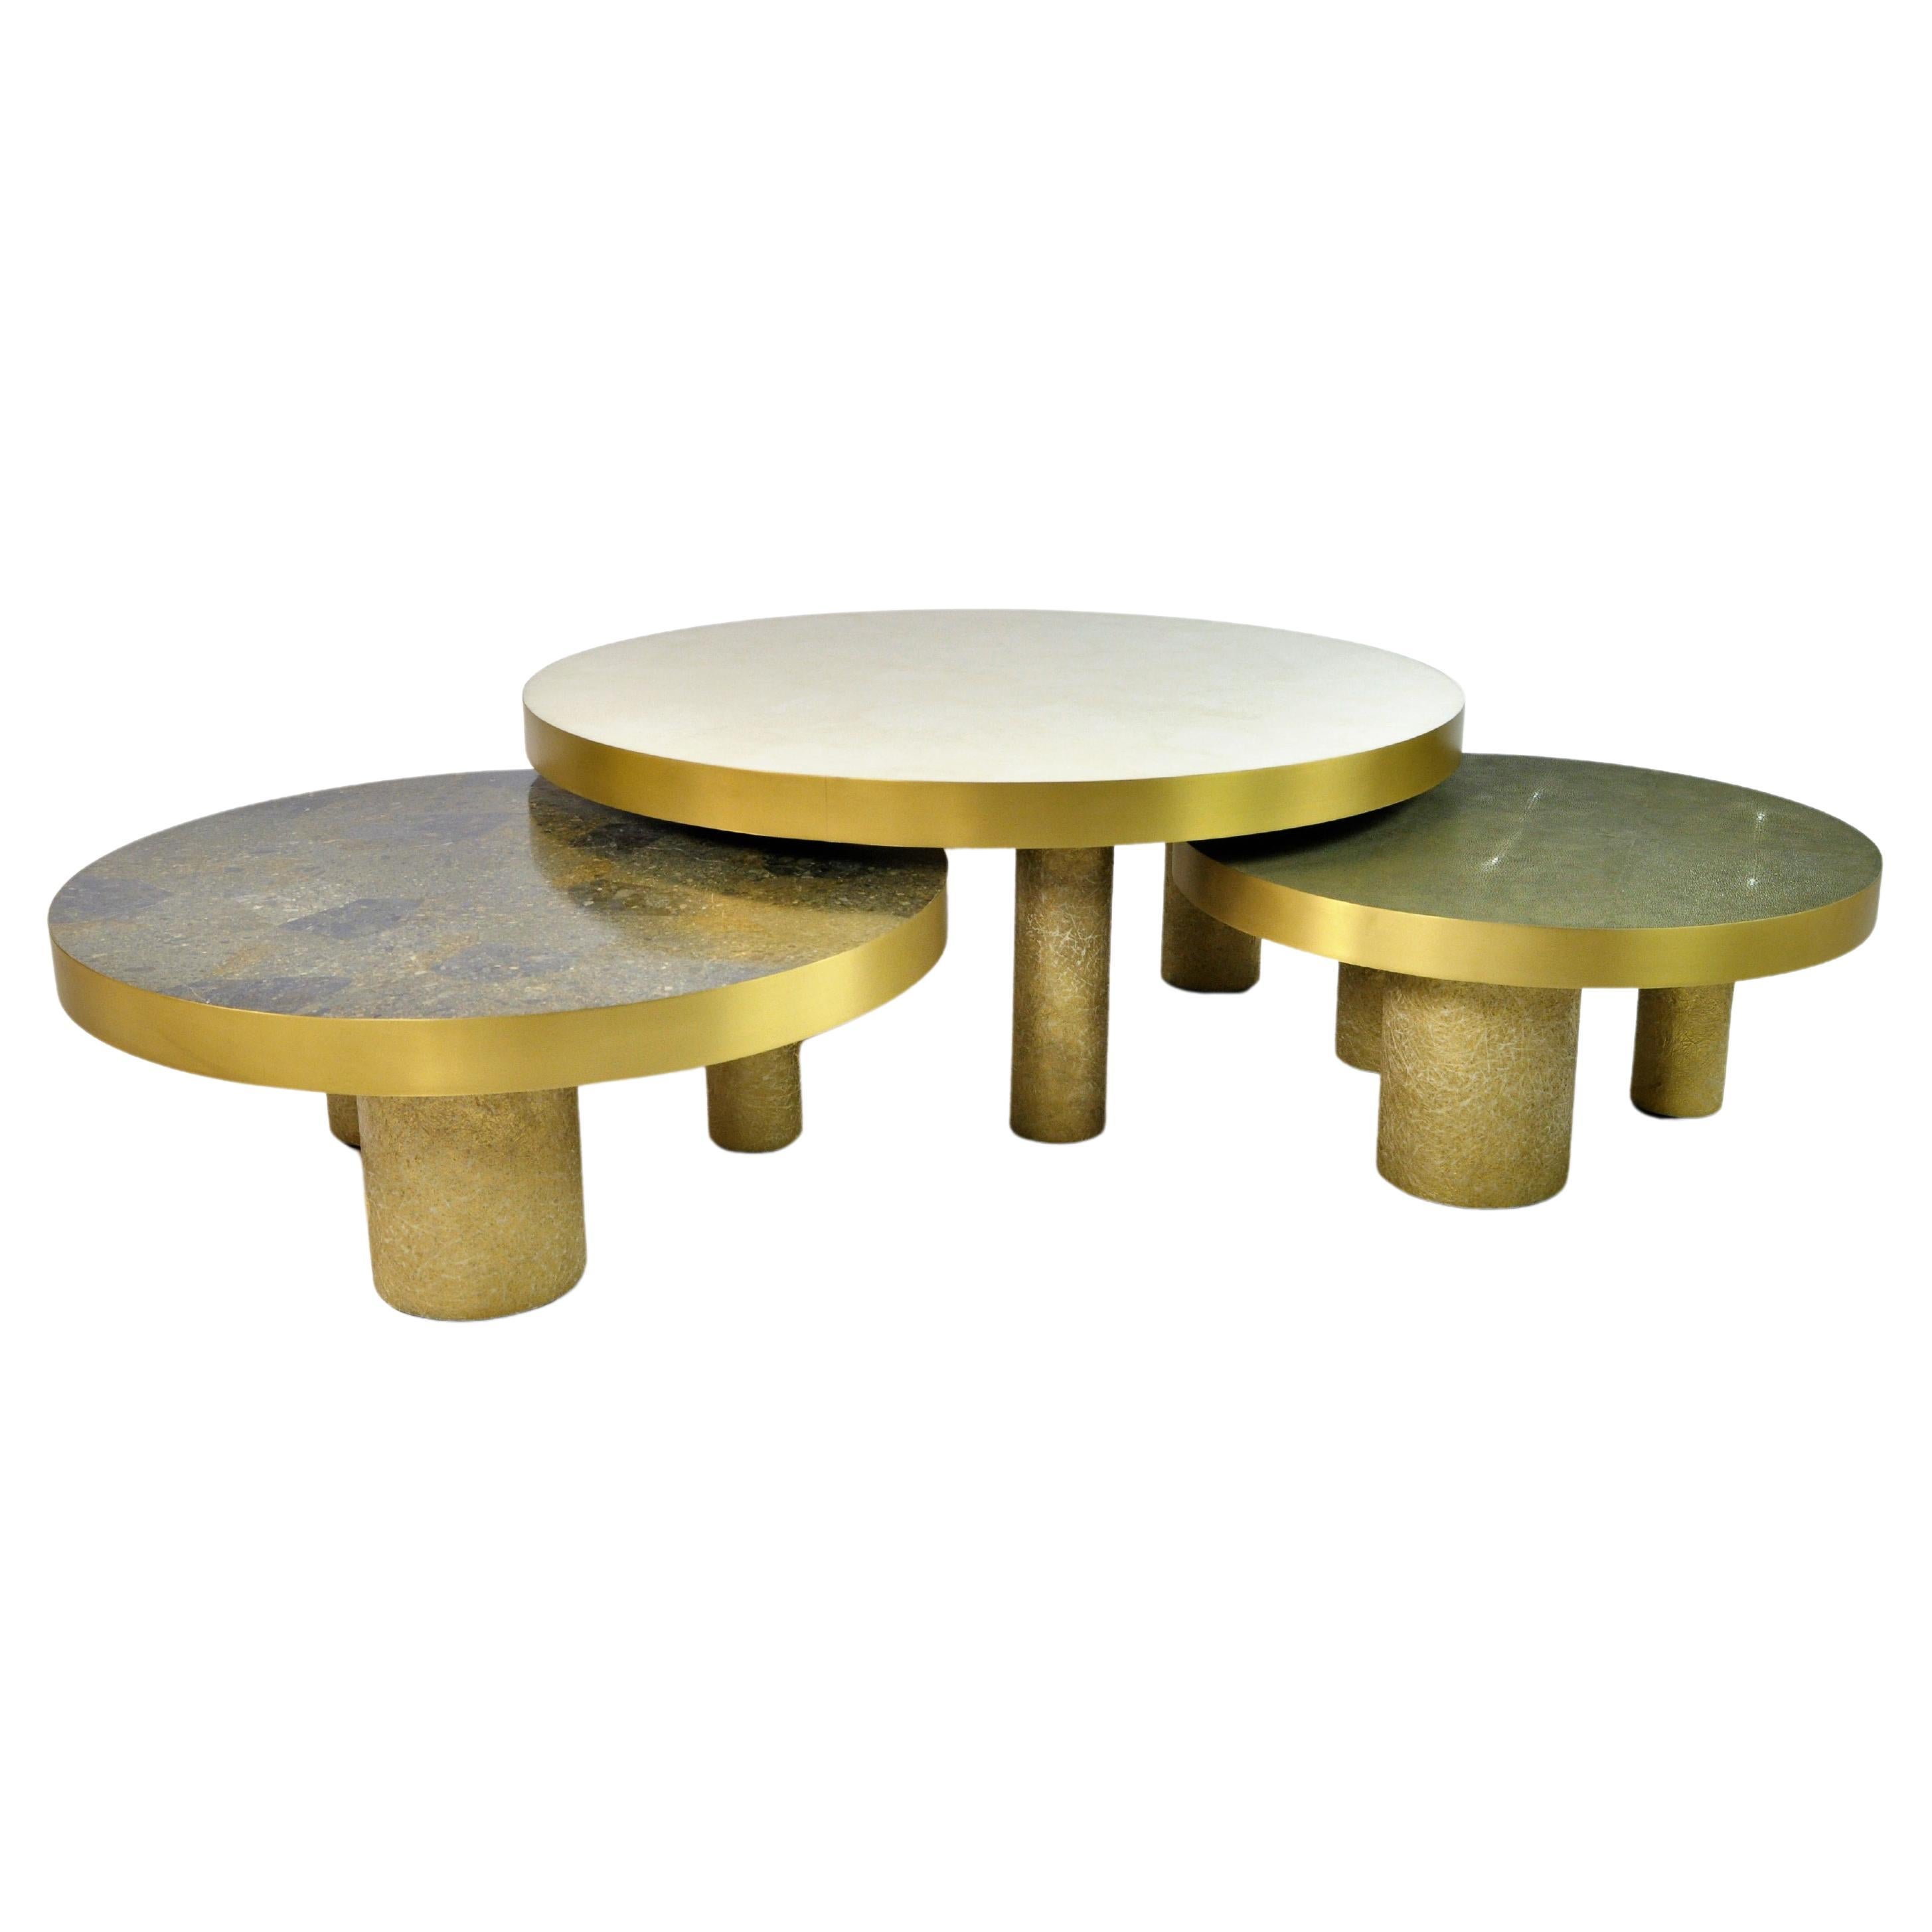 Set of 3 Round Coffee Tables in Rock Crystal, Shagreen and Stone by Ginger Brown